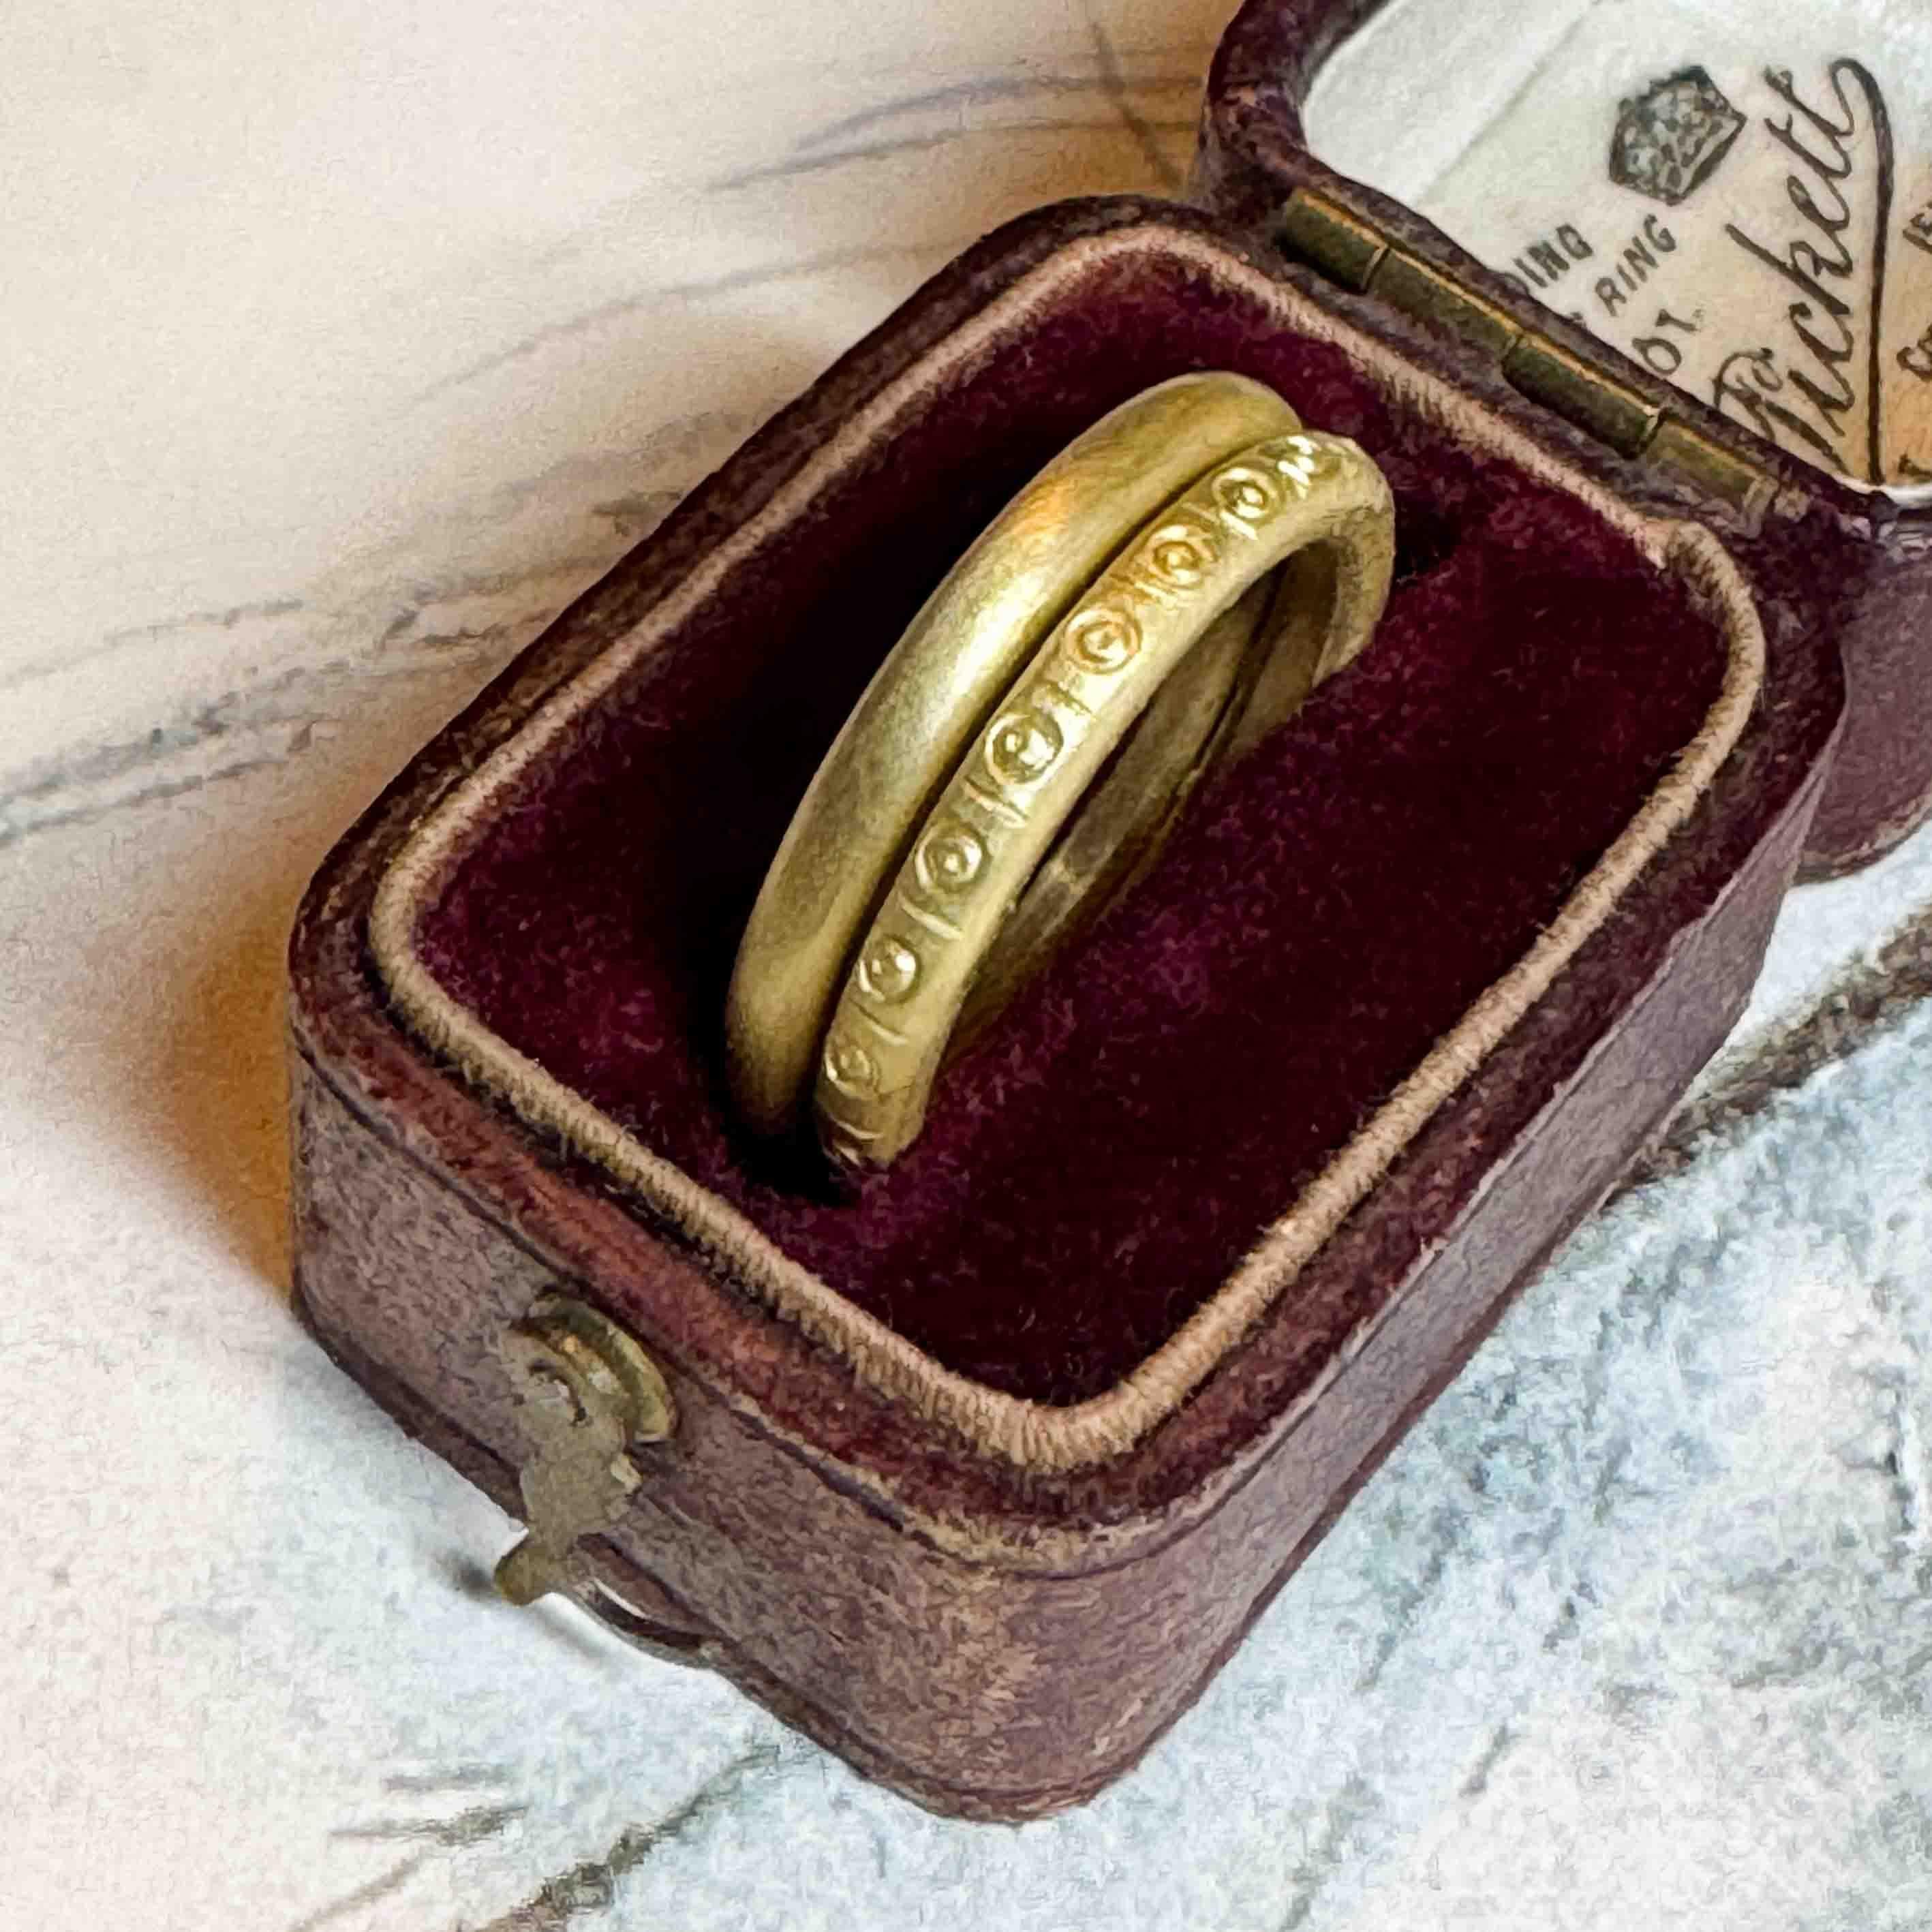 The Romy ethical wedding ring is handmade using 18ct Fairmined gold. Added to the gold hand-stamped patterns create a unique artisanal ring you won’t find on the high street.

Romy is a 2.3 mm diameter round halo style band.
 
Inspired by my trip to